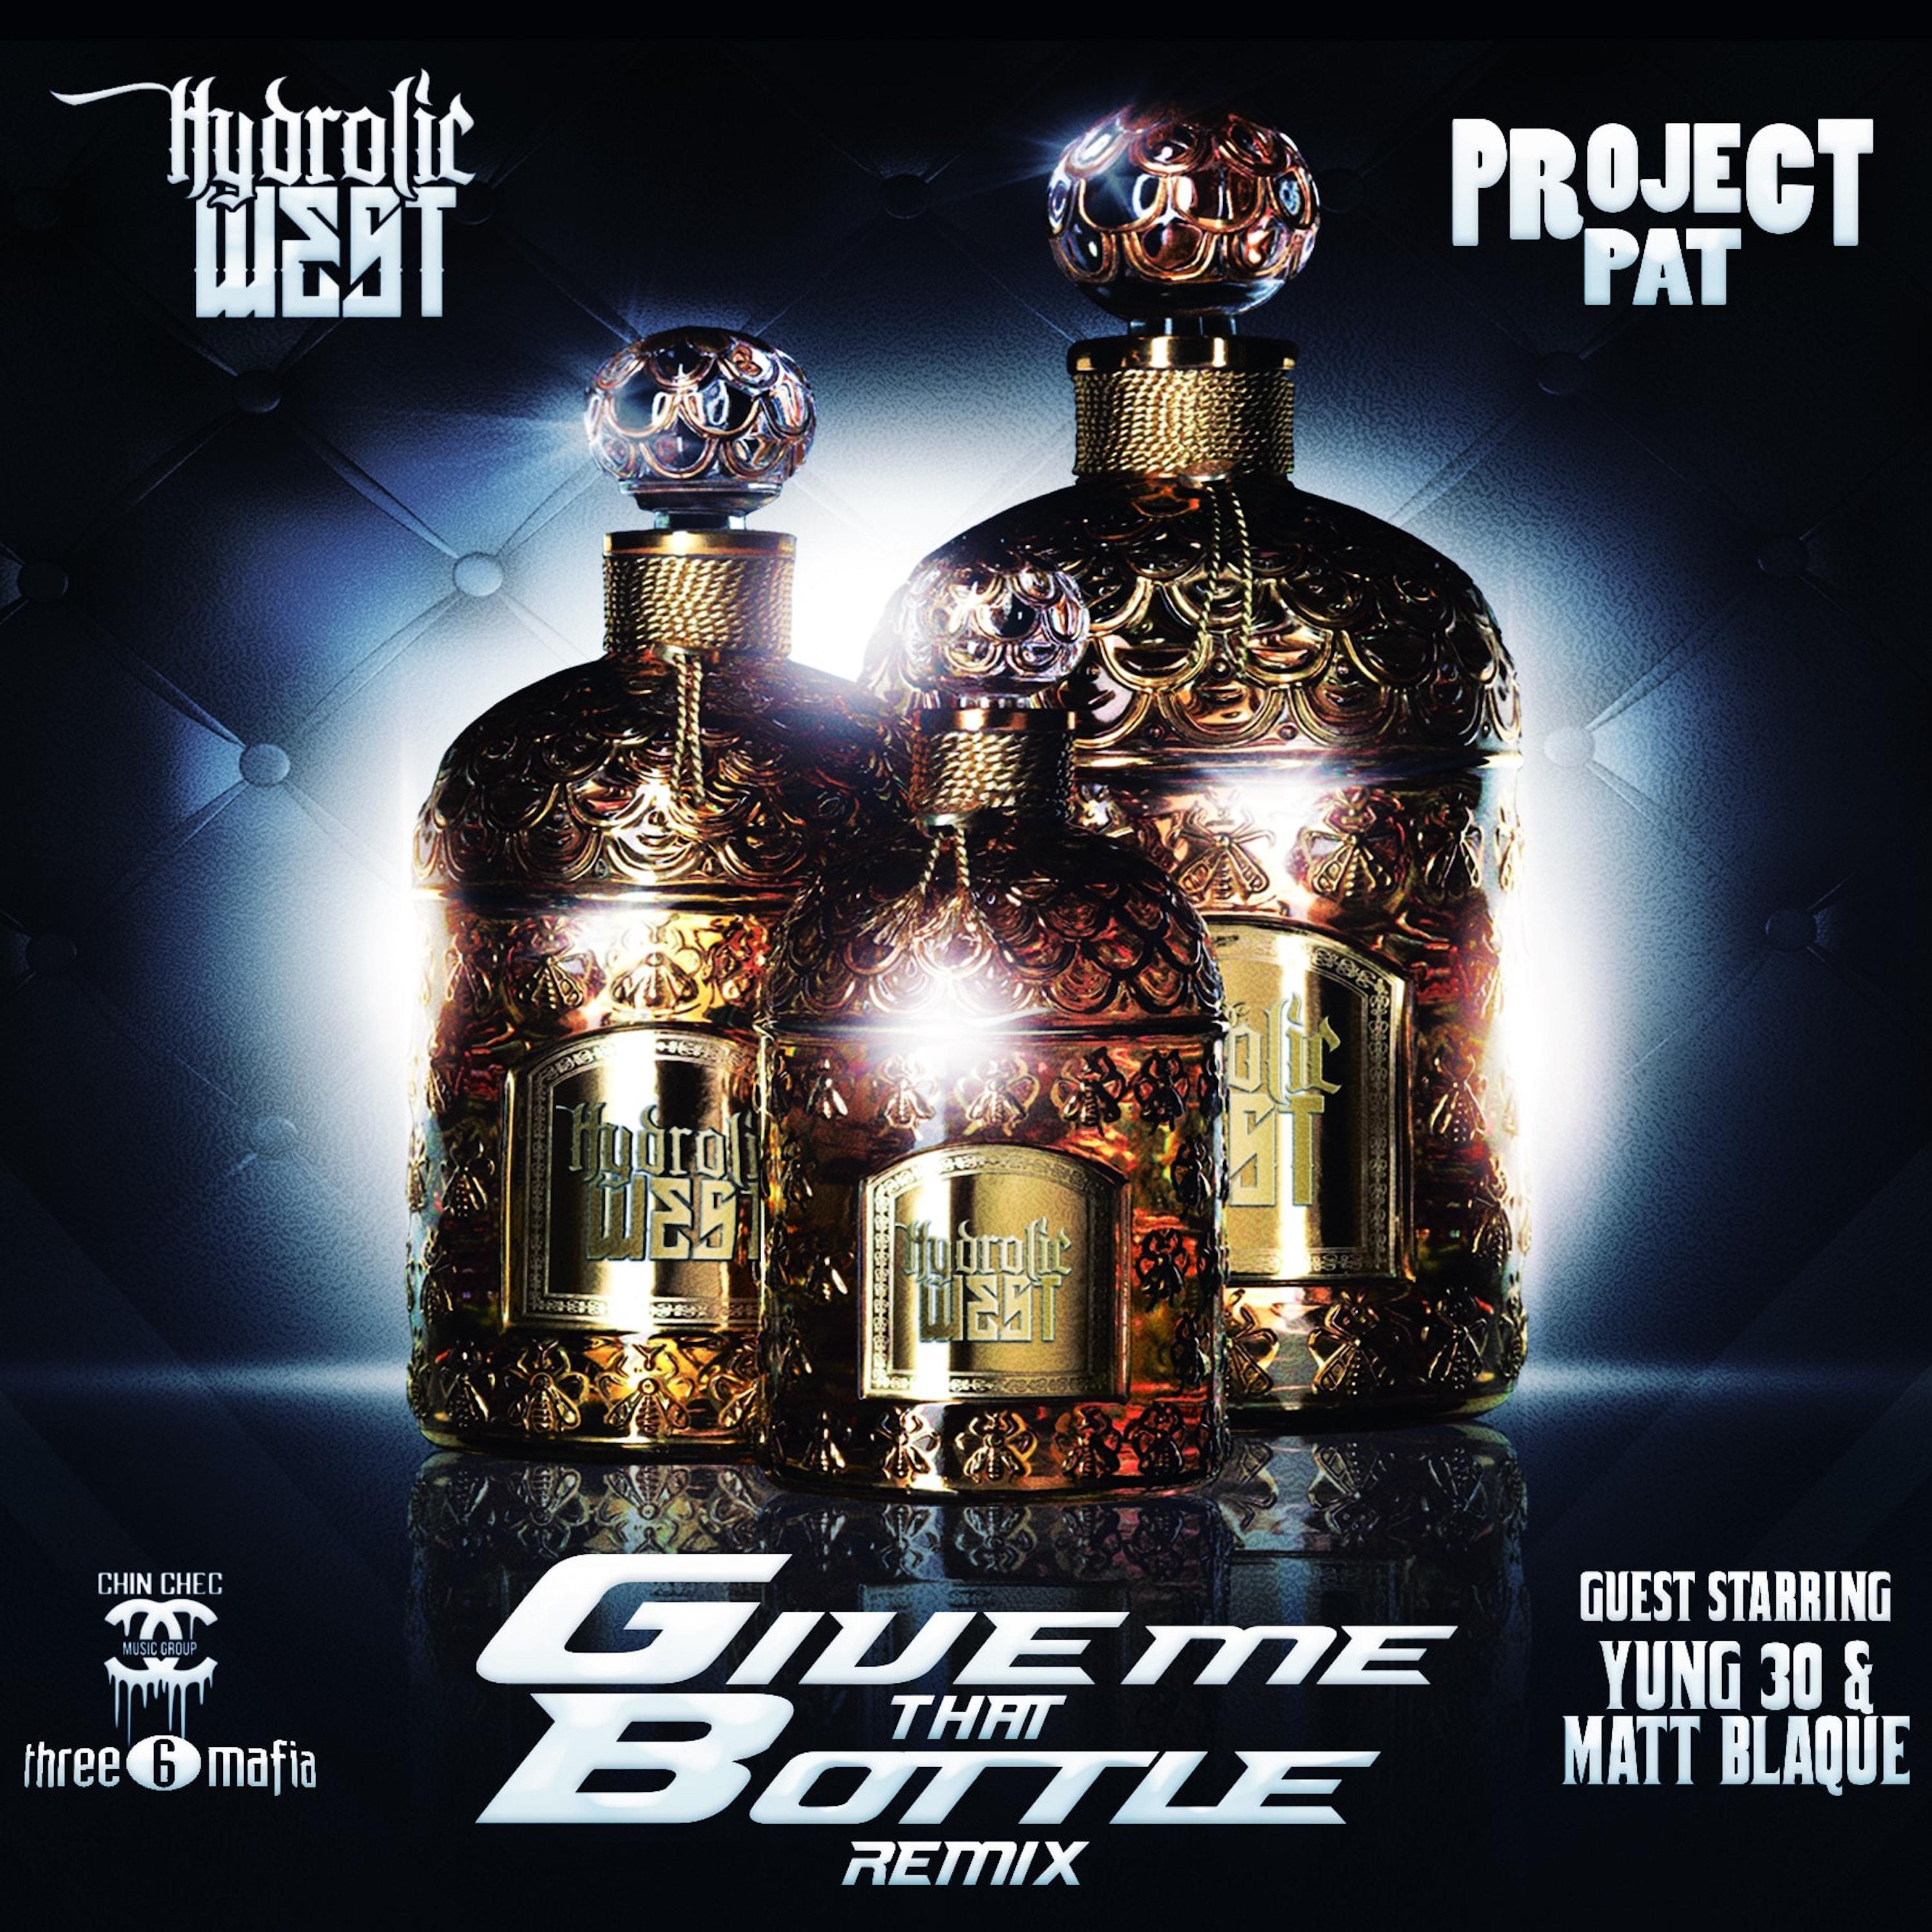 Give Me That Bottle (Remix)